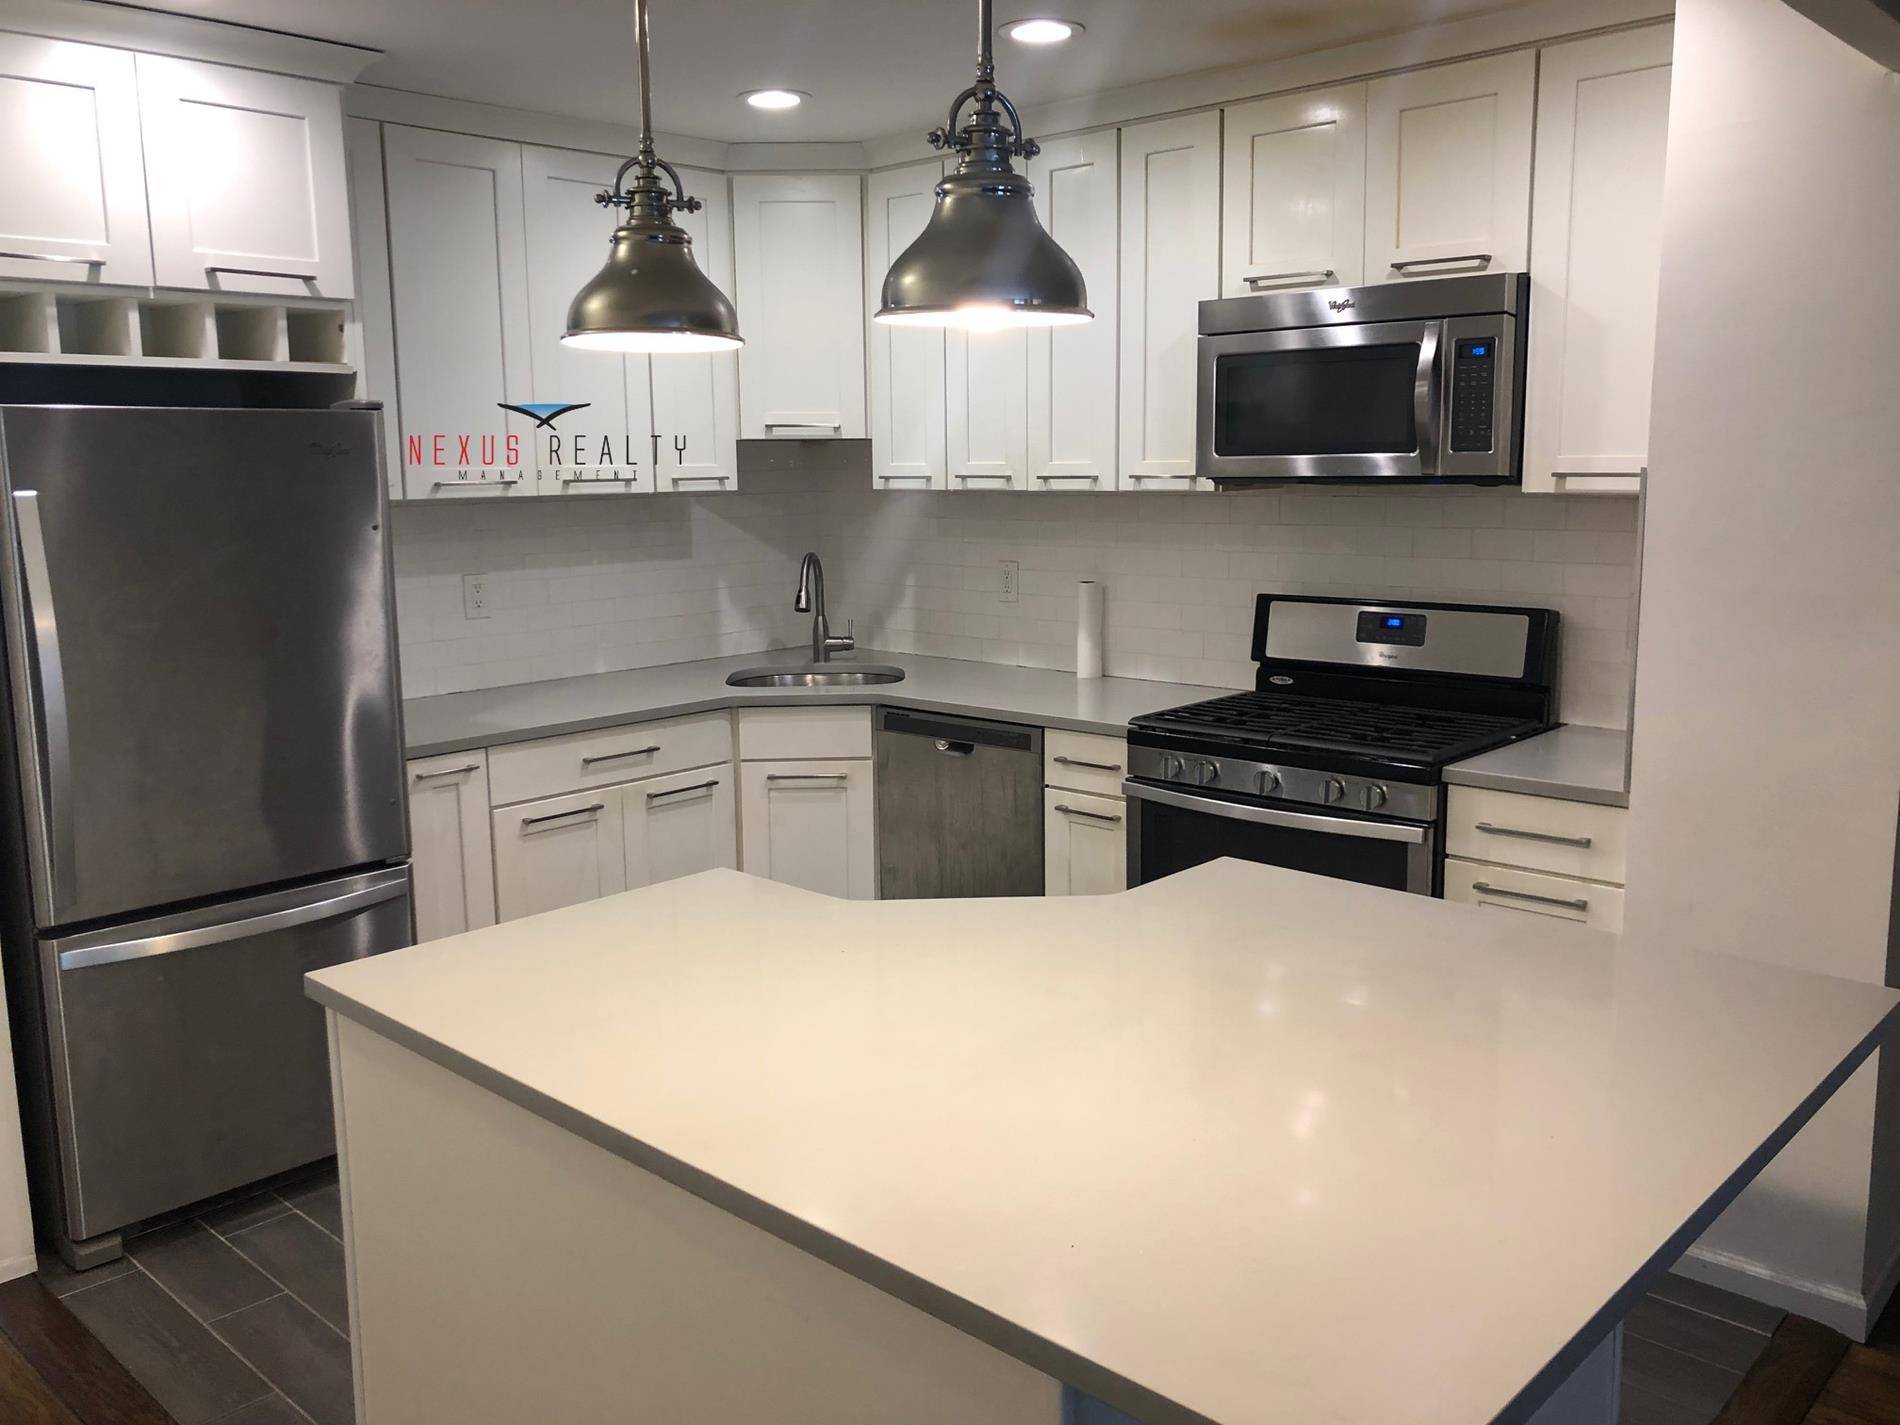 Beautiful newly remodeled 3 bedroom apartment with 1 1 2 bathrooms and walk in closet on the 3rd floor of a beautiful buildingBrand new hardwood floors.